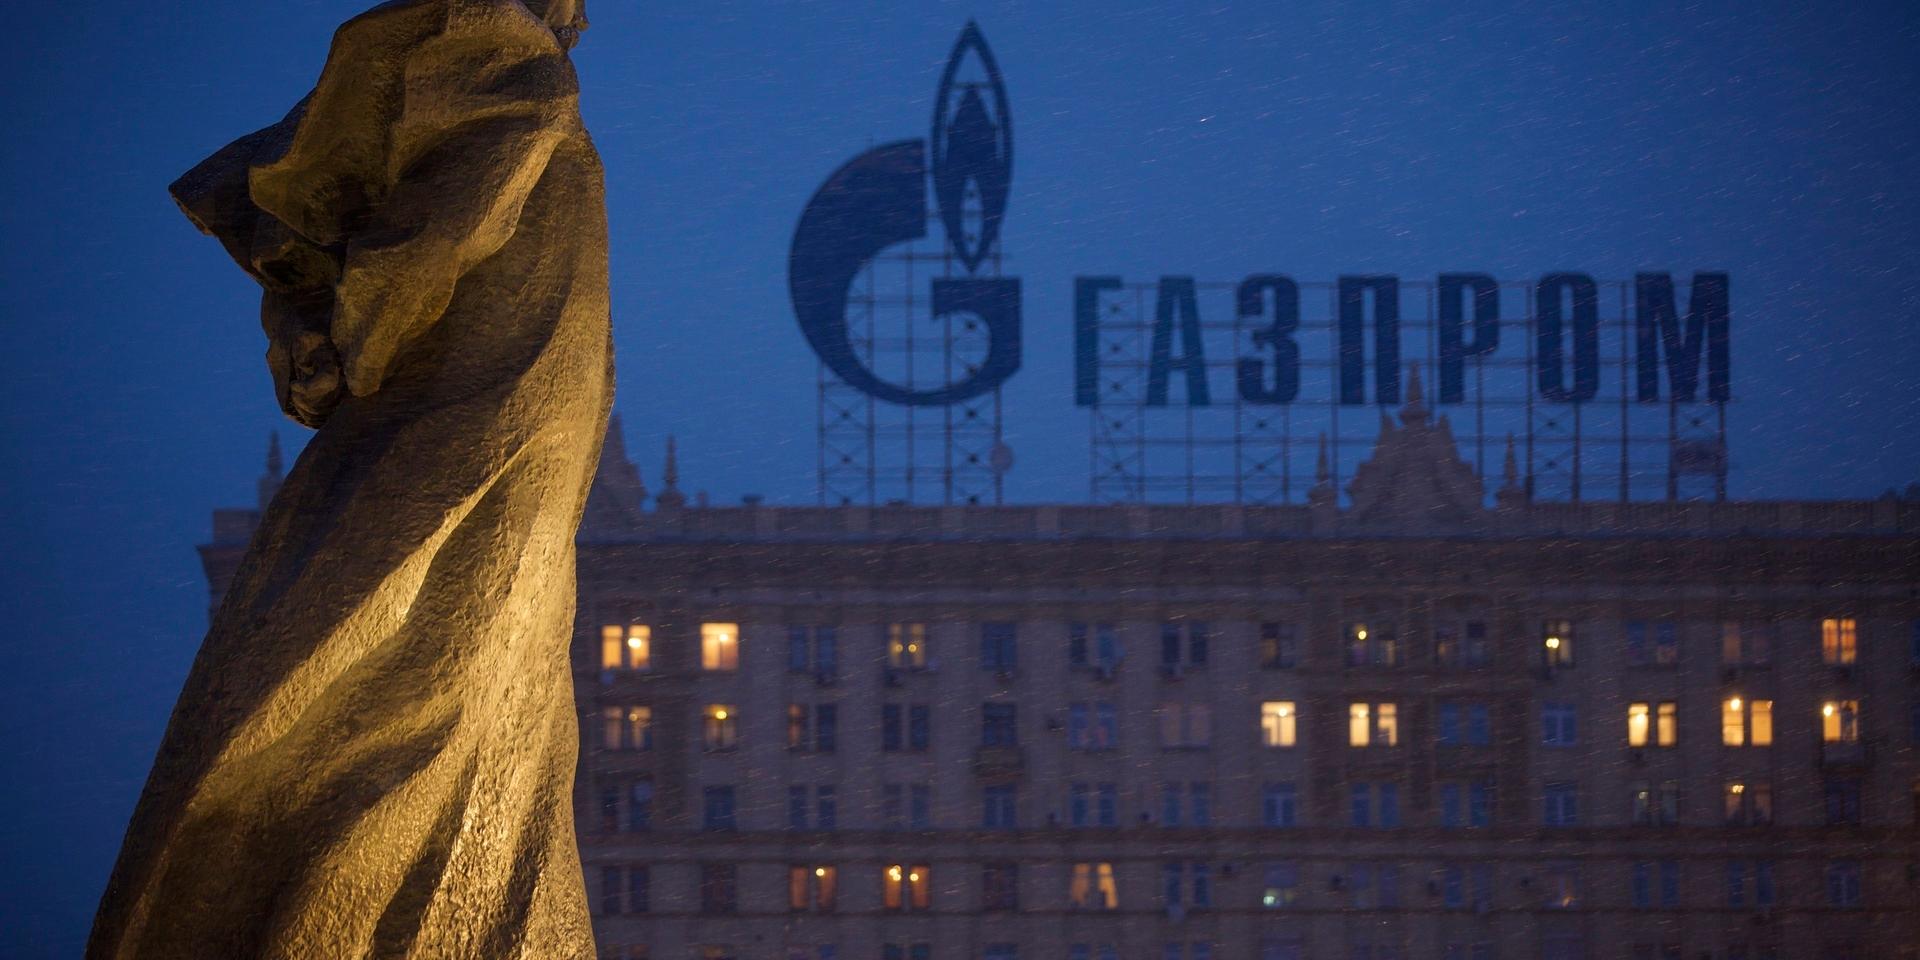 FILE - In this Tuesday, March 4, 2014 file photo, a monument to Ukrainian poet and writer Taras Shevchenko is silhouetted against an apartment building with a sign advertising Russia's natural gas giant Gazprom, in Moscow, Russia. 